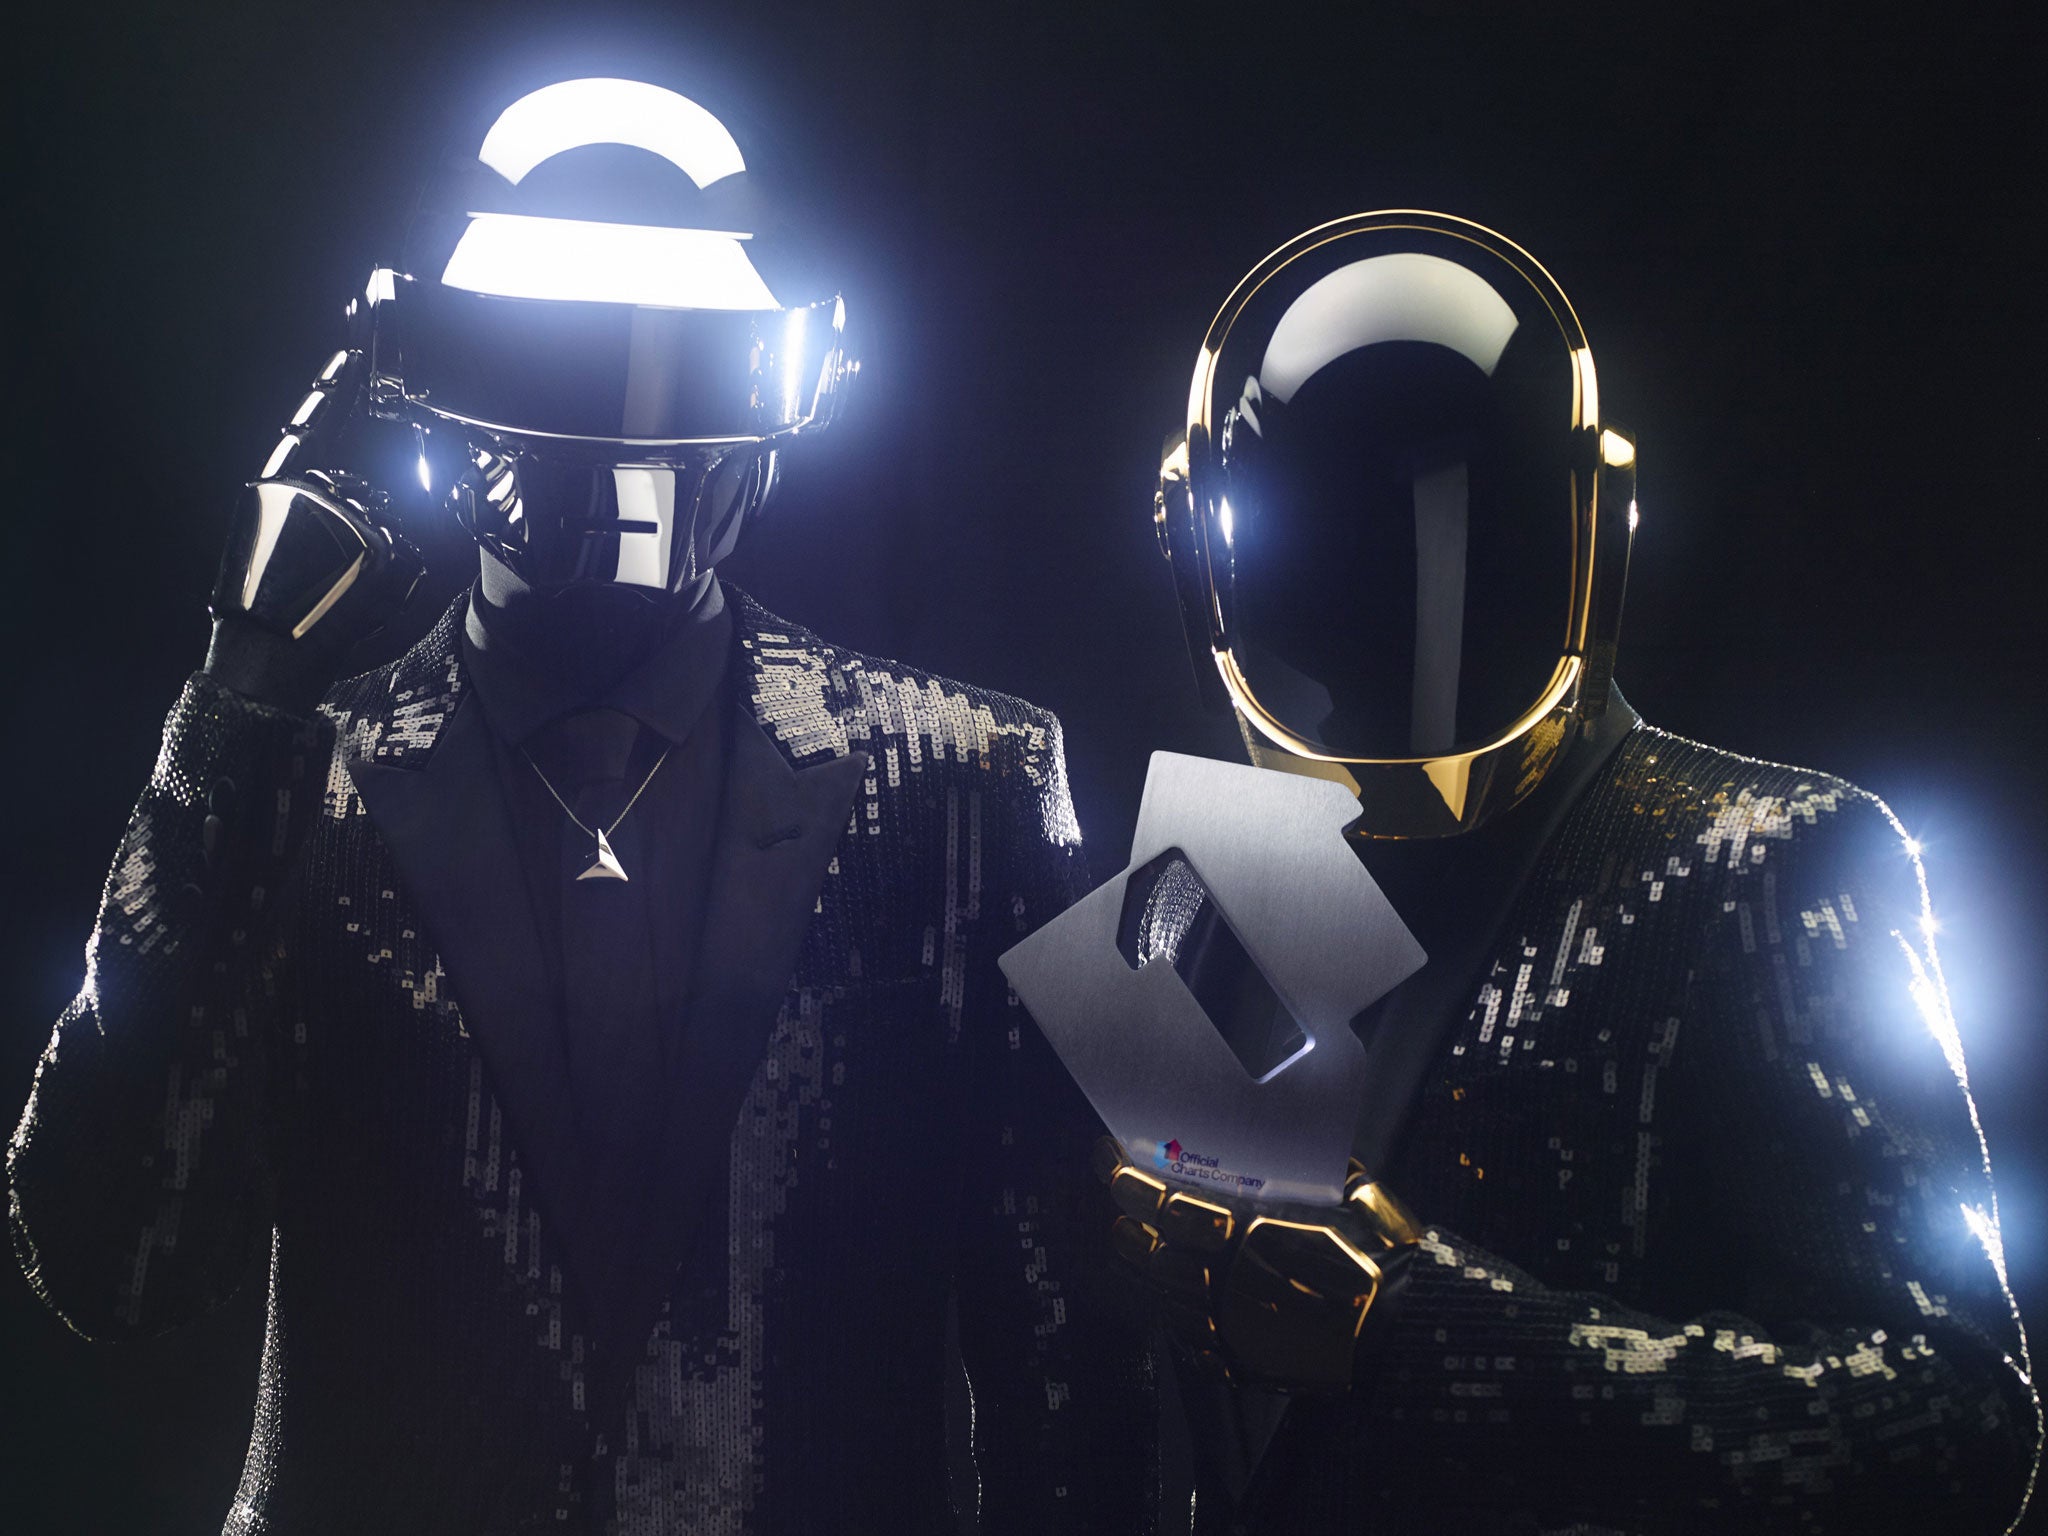 Daft Punk’s single ‘Get Lucky’ has sold over a million copies so far